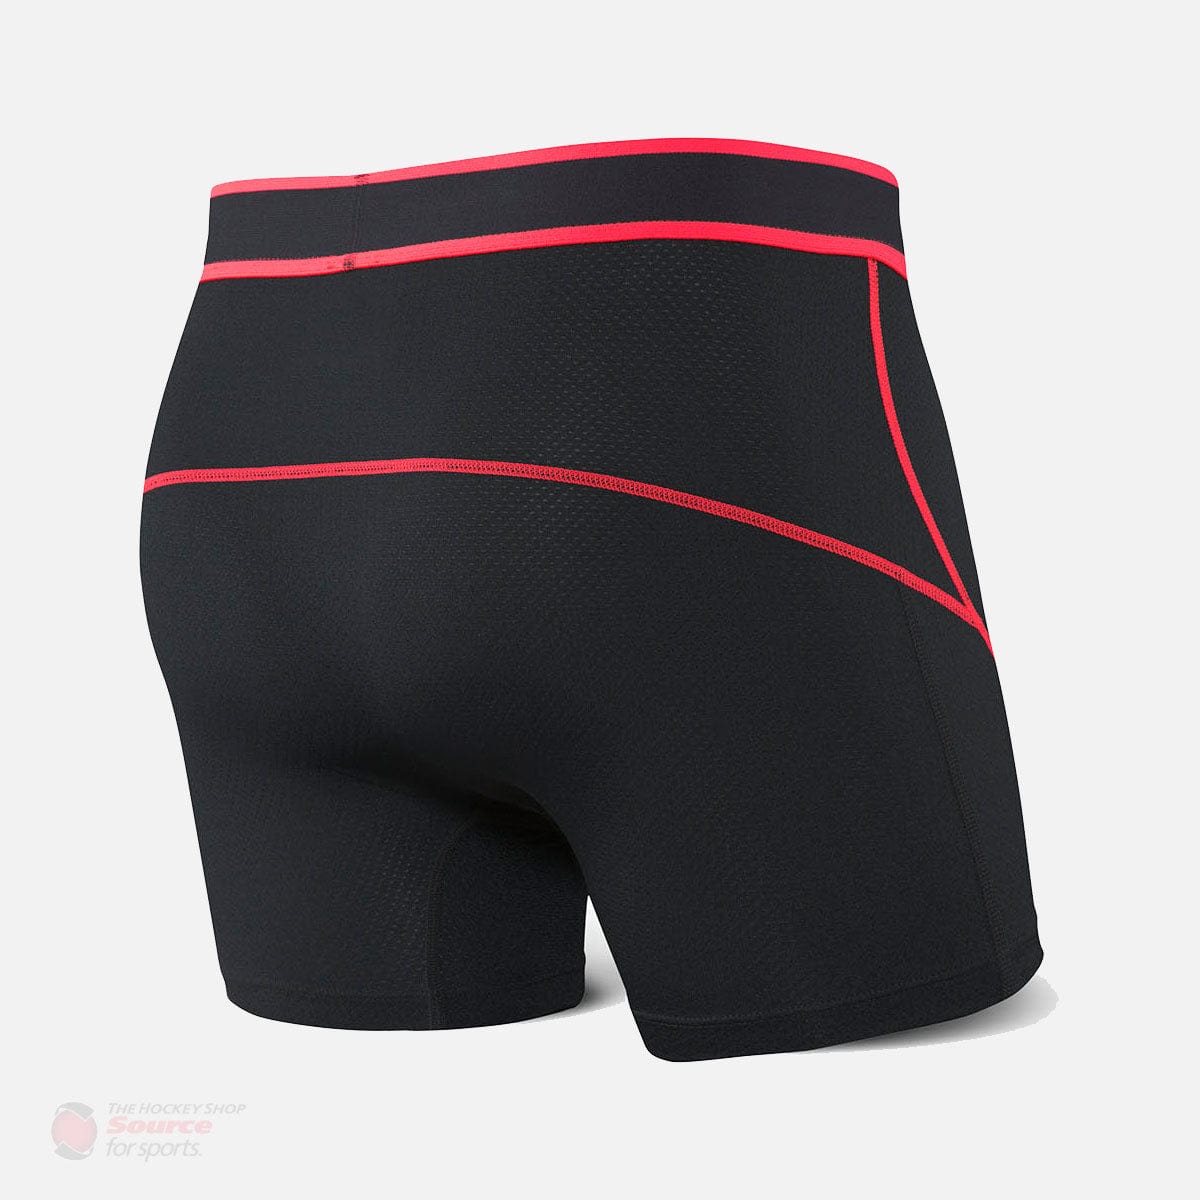 Saxx Kinetic Boxers - Black / Neon Red